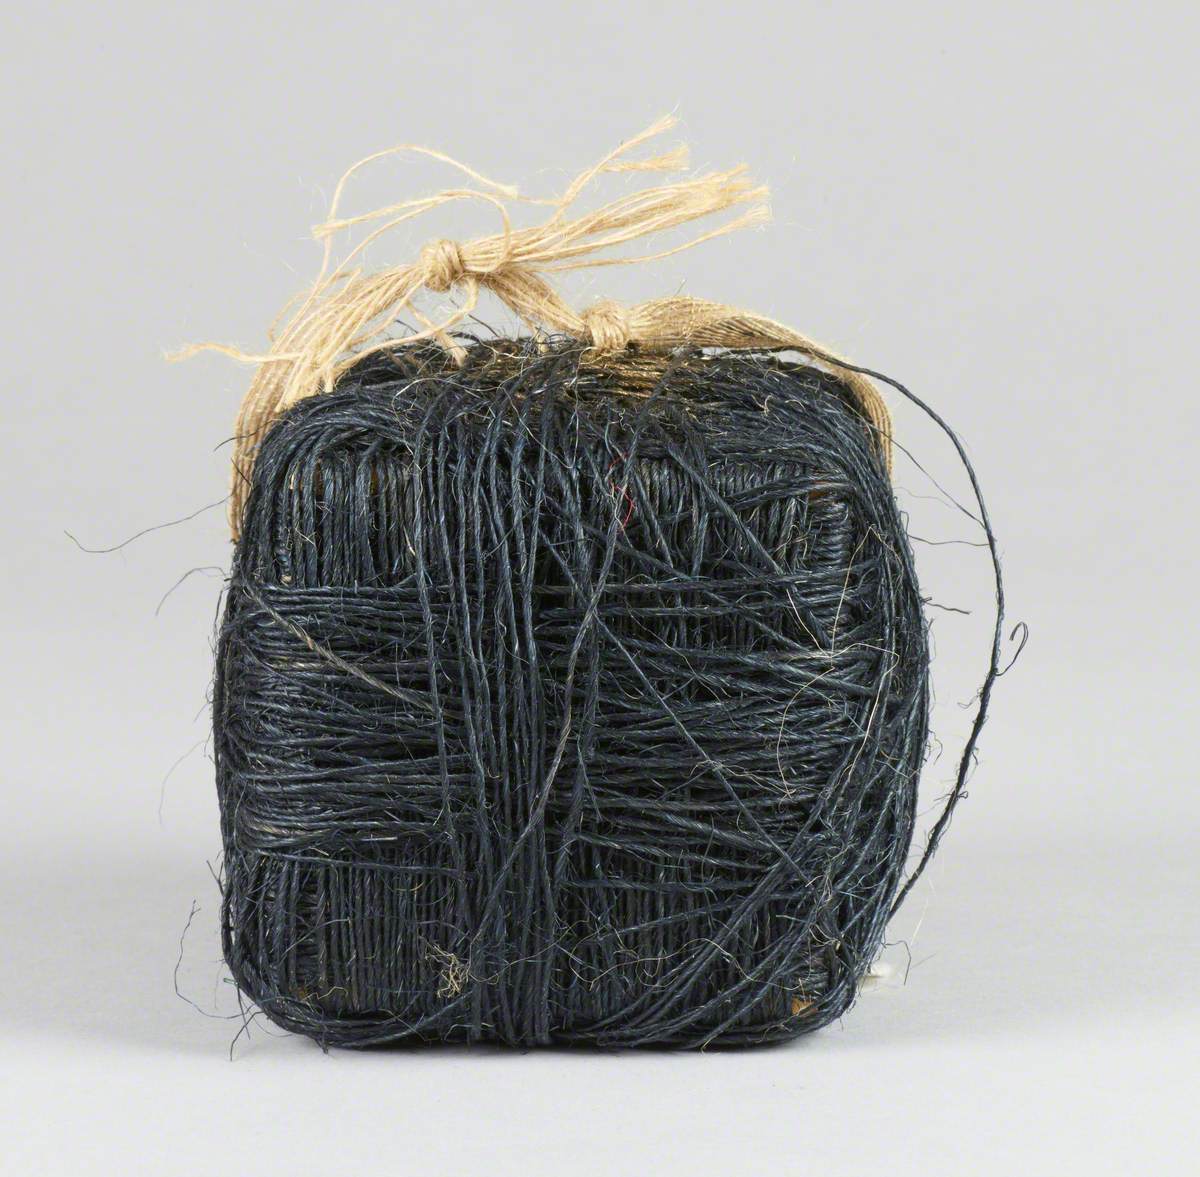 121 Linked Cubes: Cube Covered in Black Jute Twine